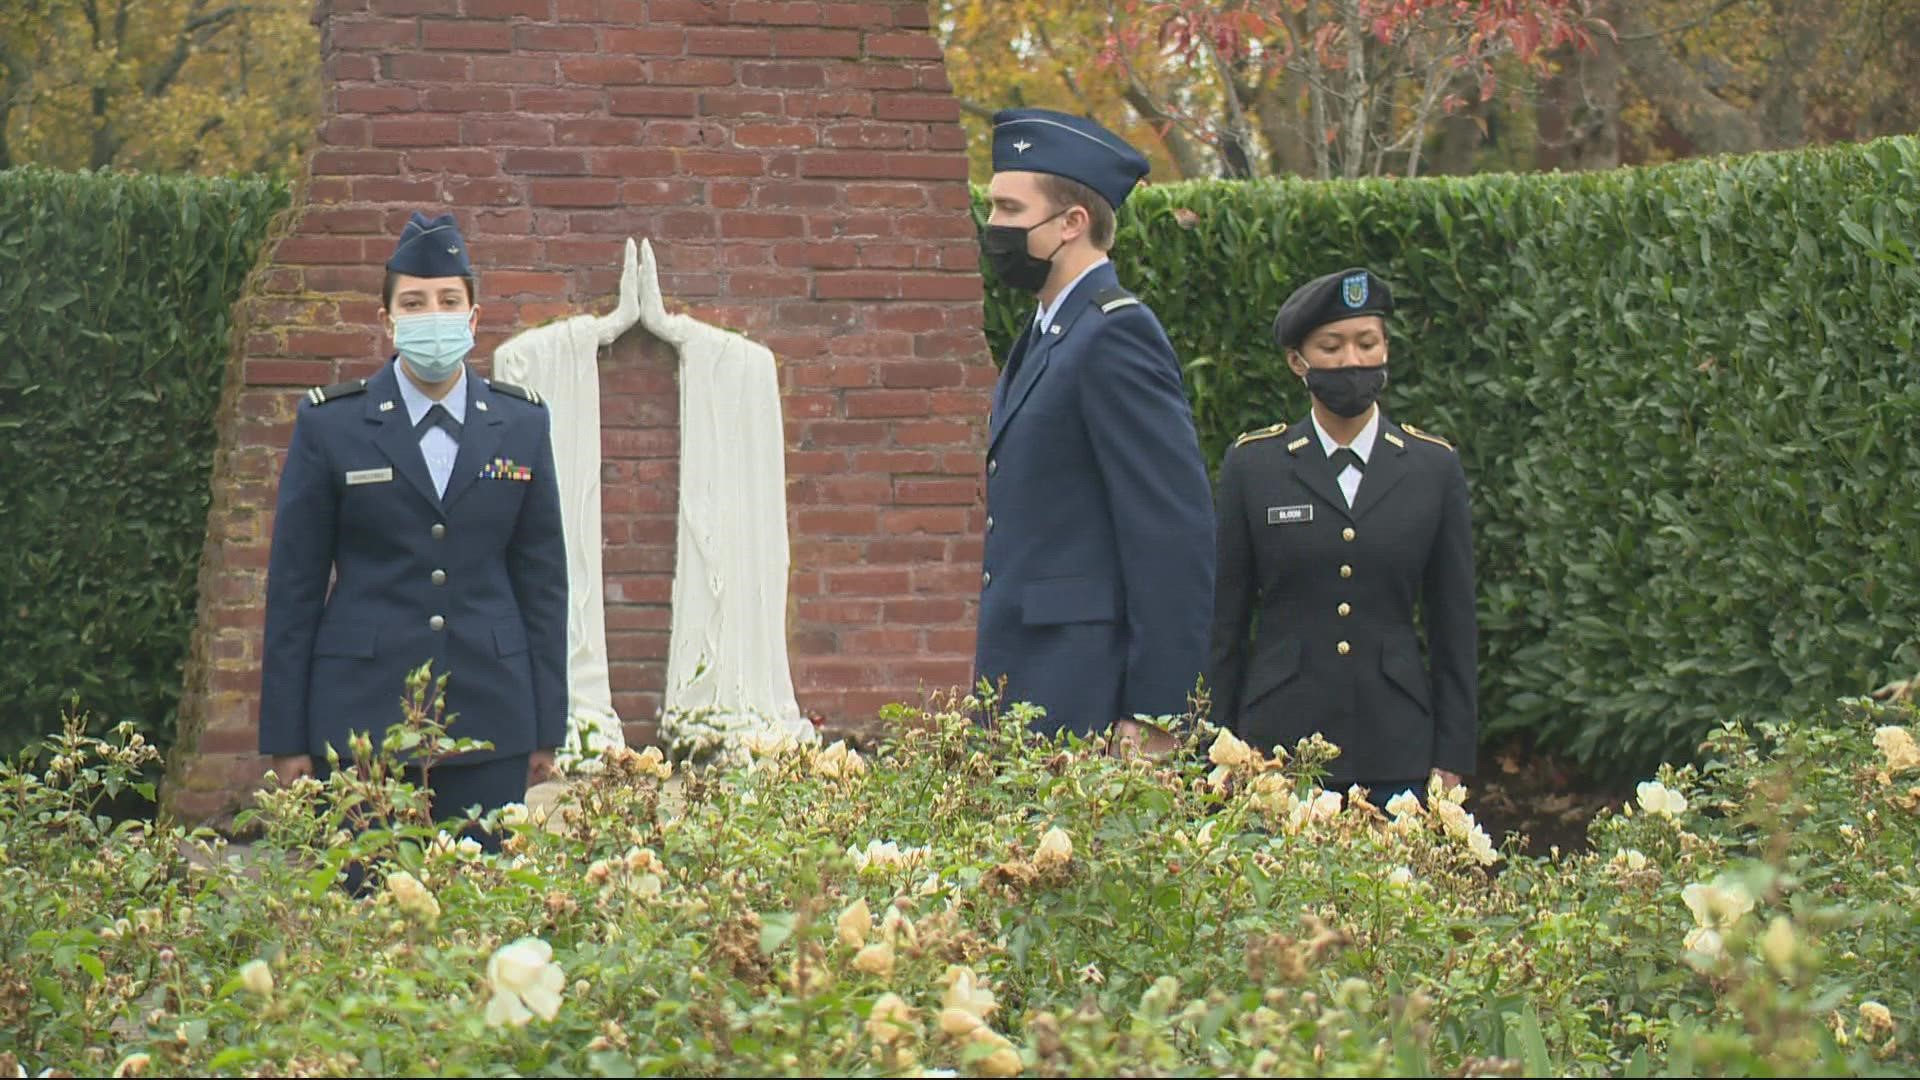 Cadets with the university's Army ROTC program have been standing watch on Veterans Day at the Praying Hands memorial for more than 60 years.